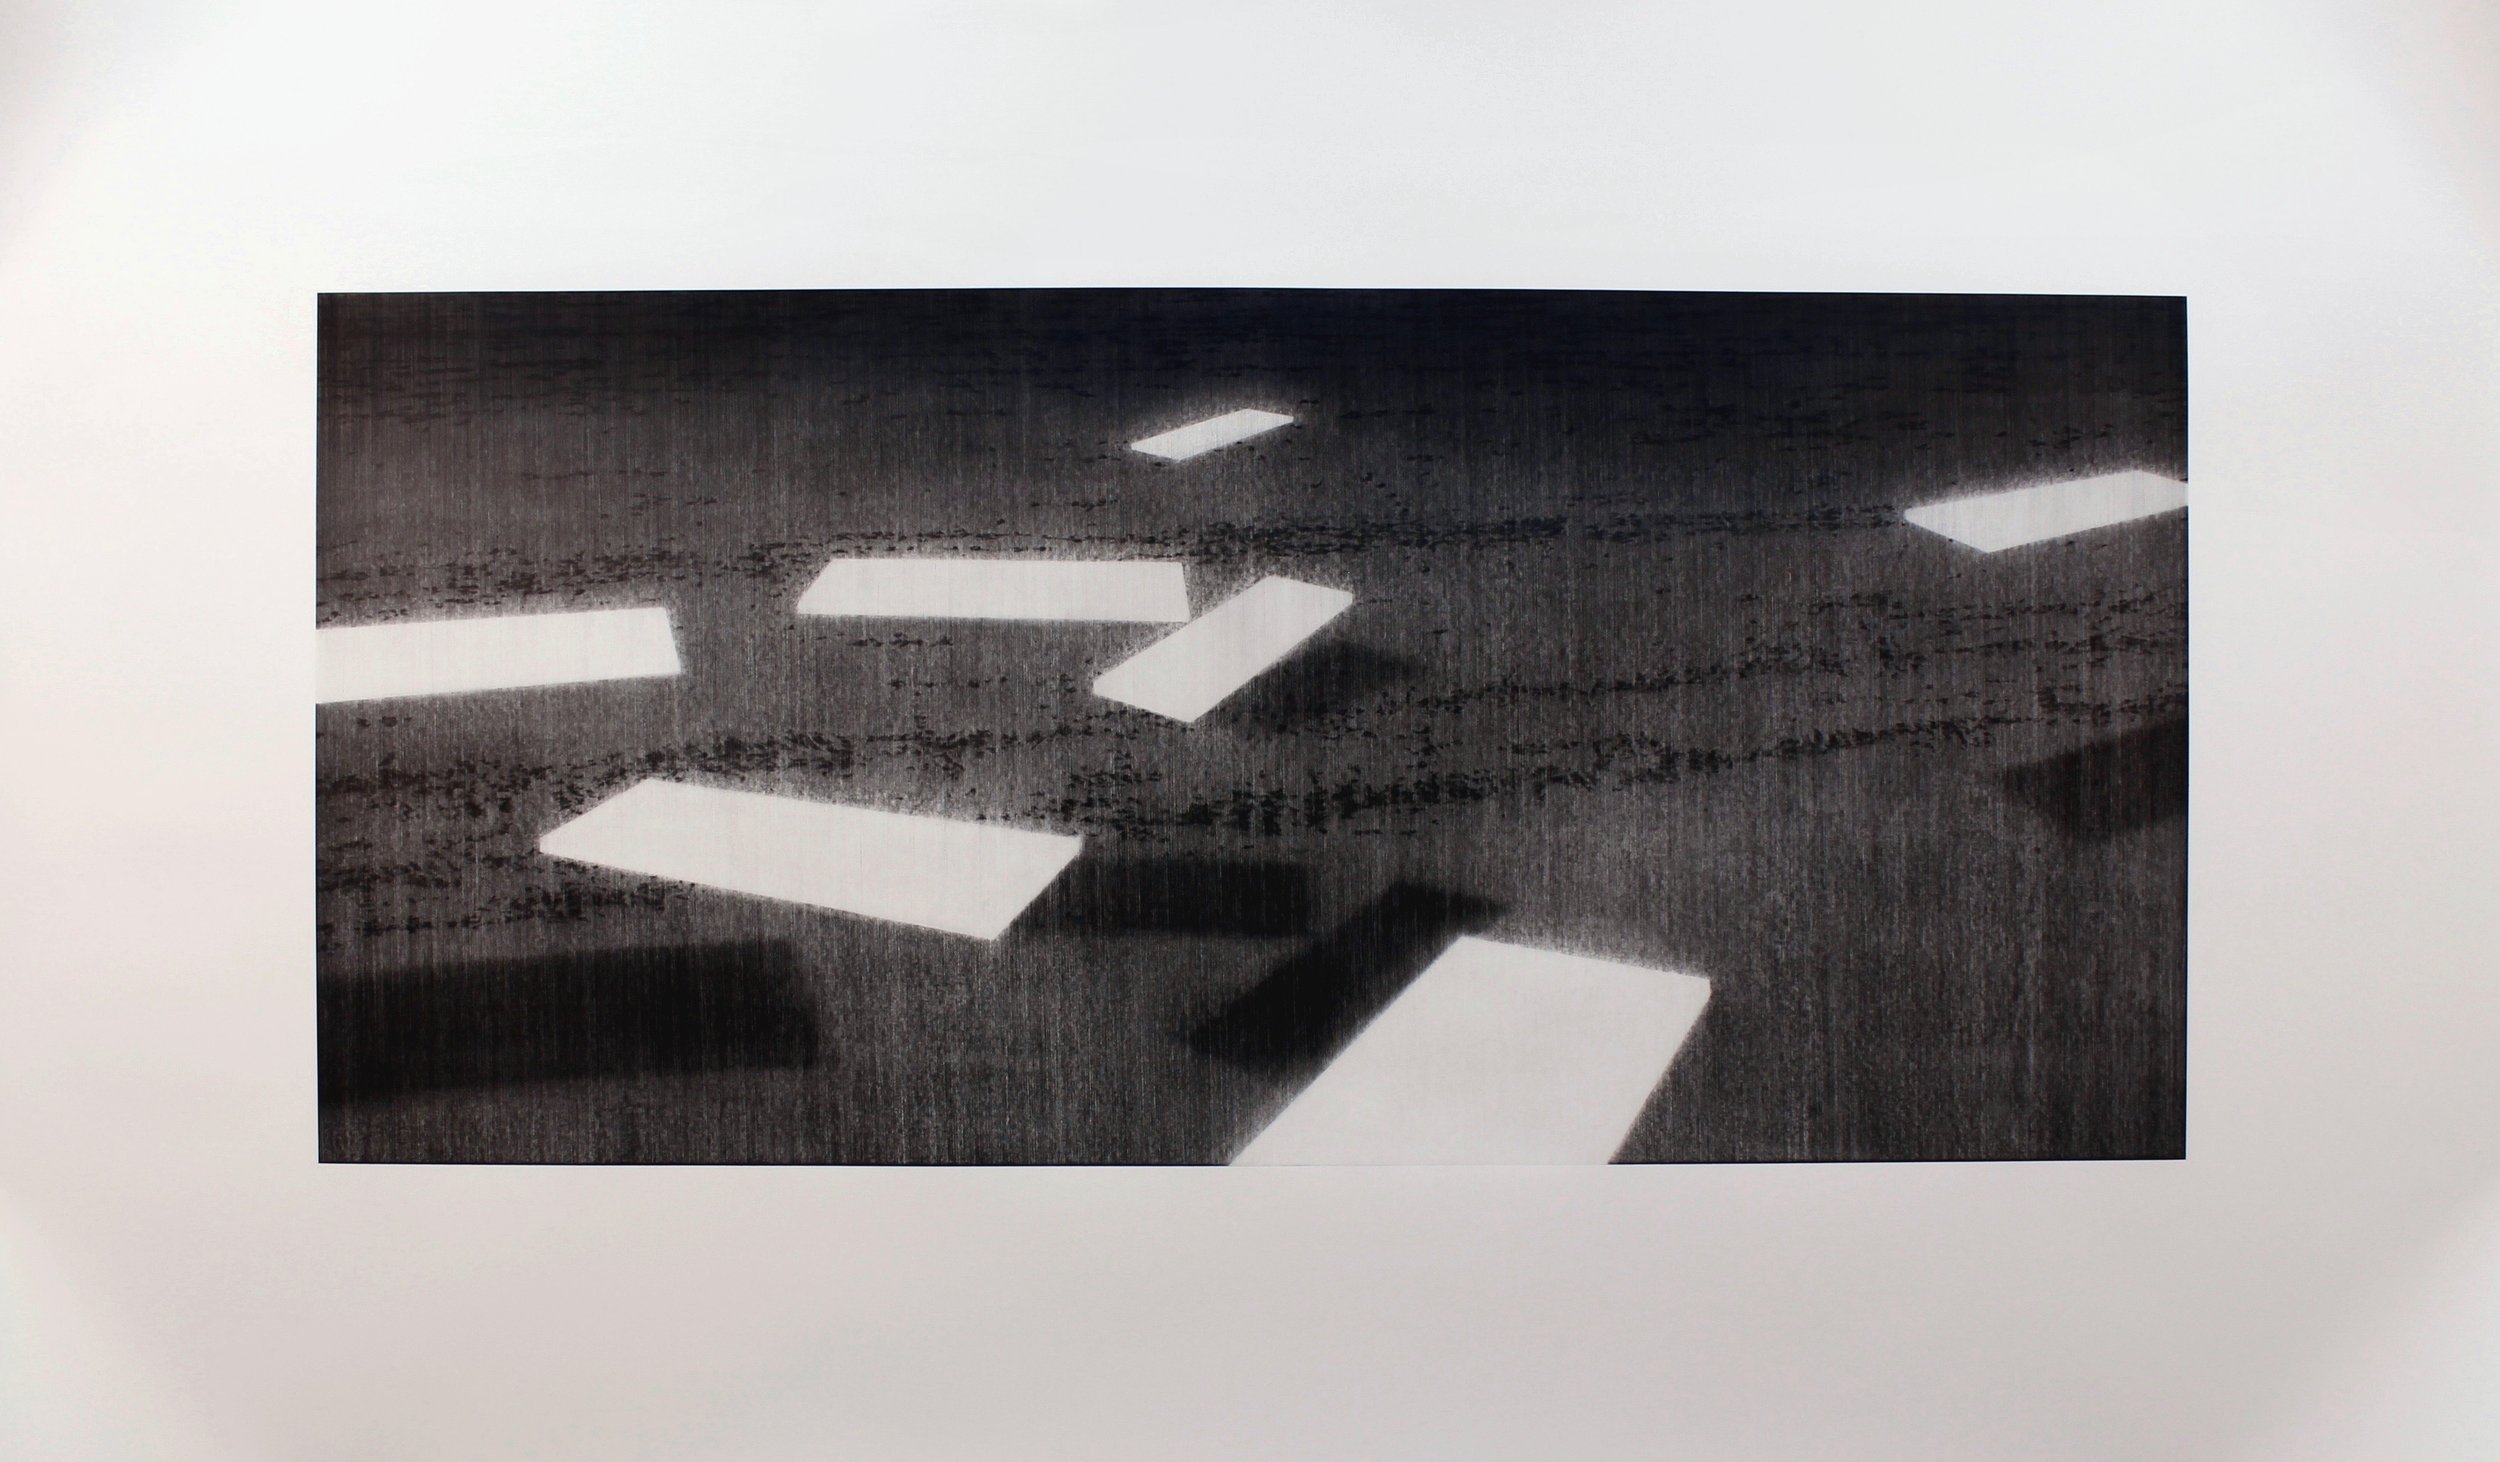   Heavier Than Air . 2016. charcoal on paper. 189x308cm 